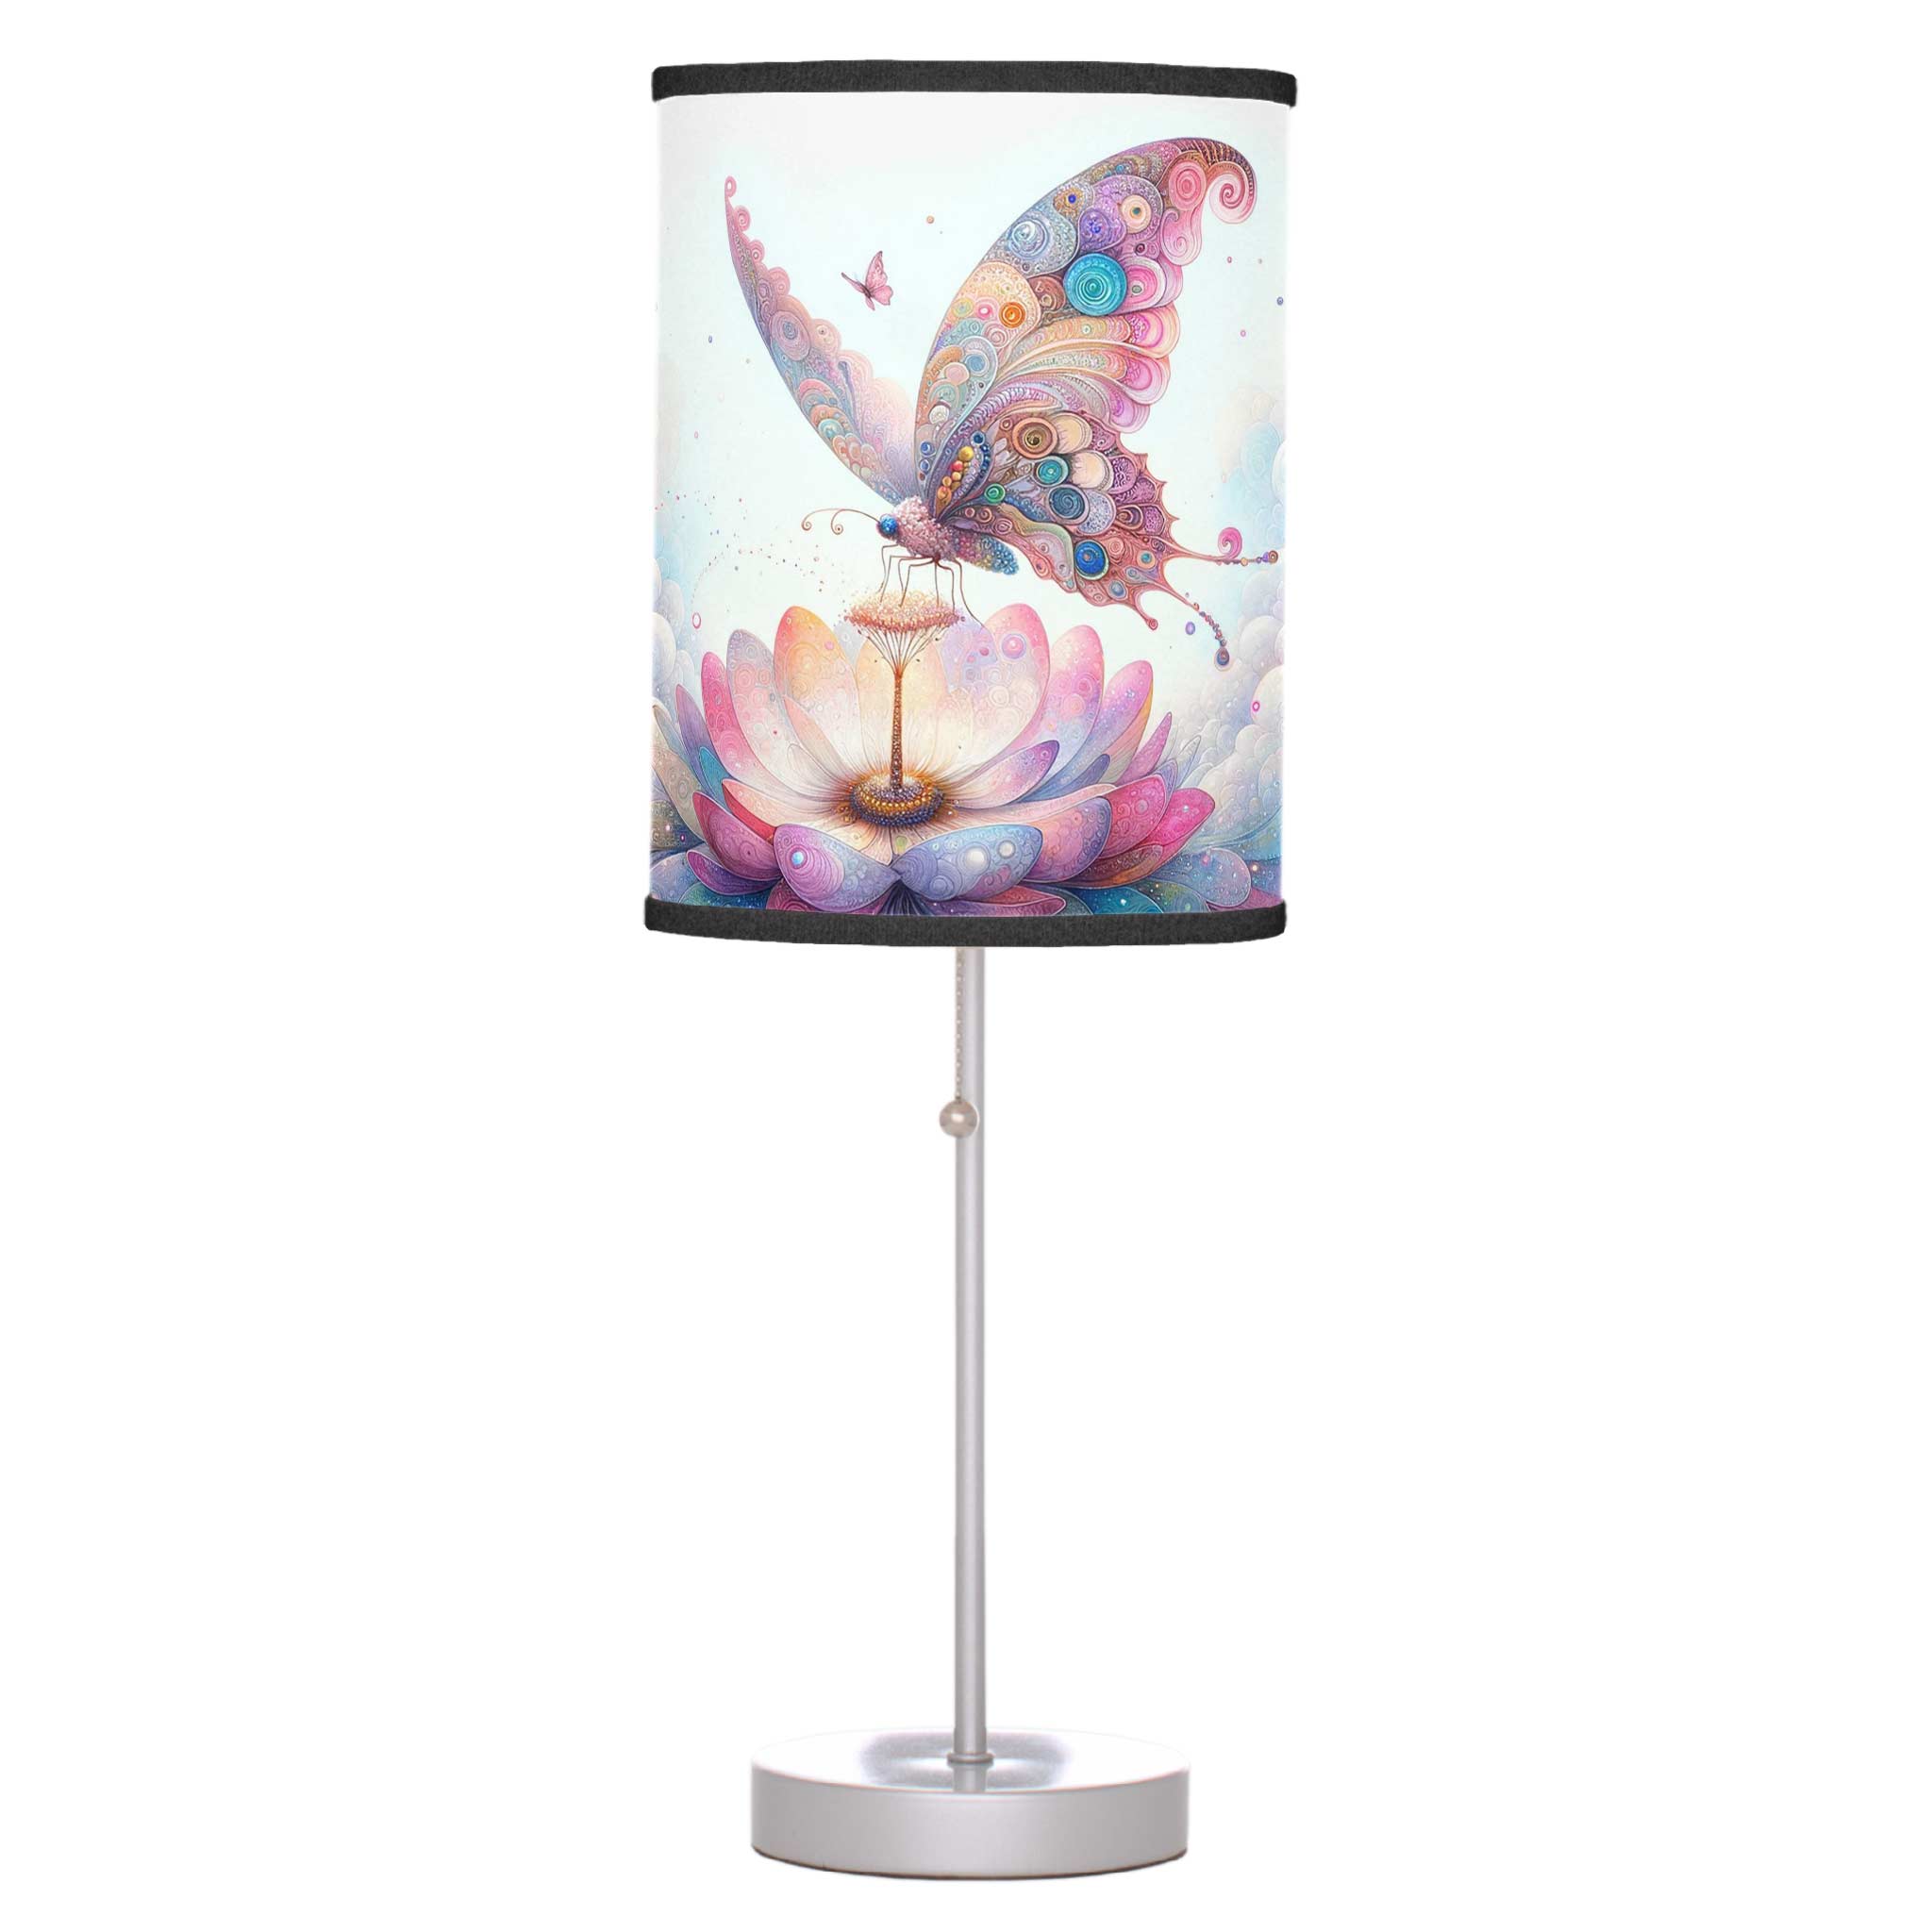 magical butterfly lamp. click to shop.